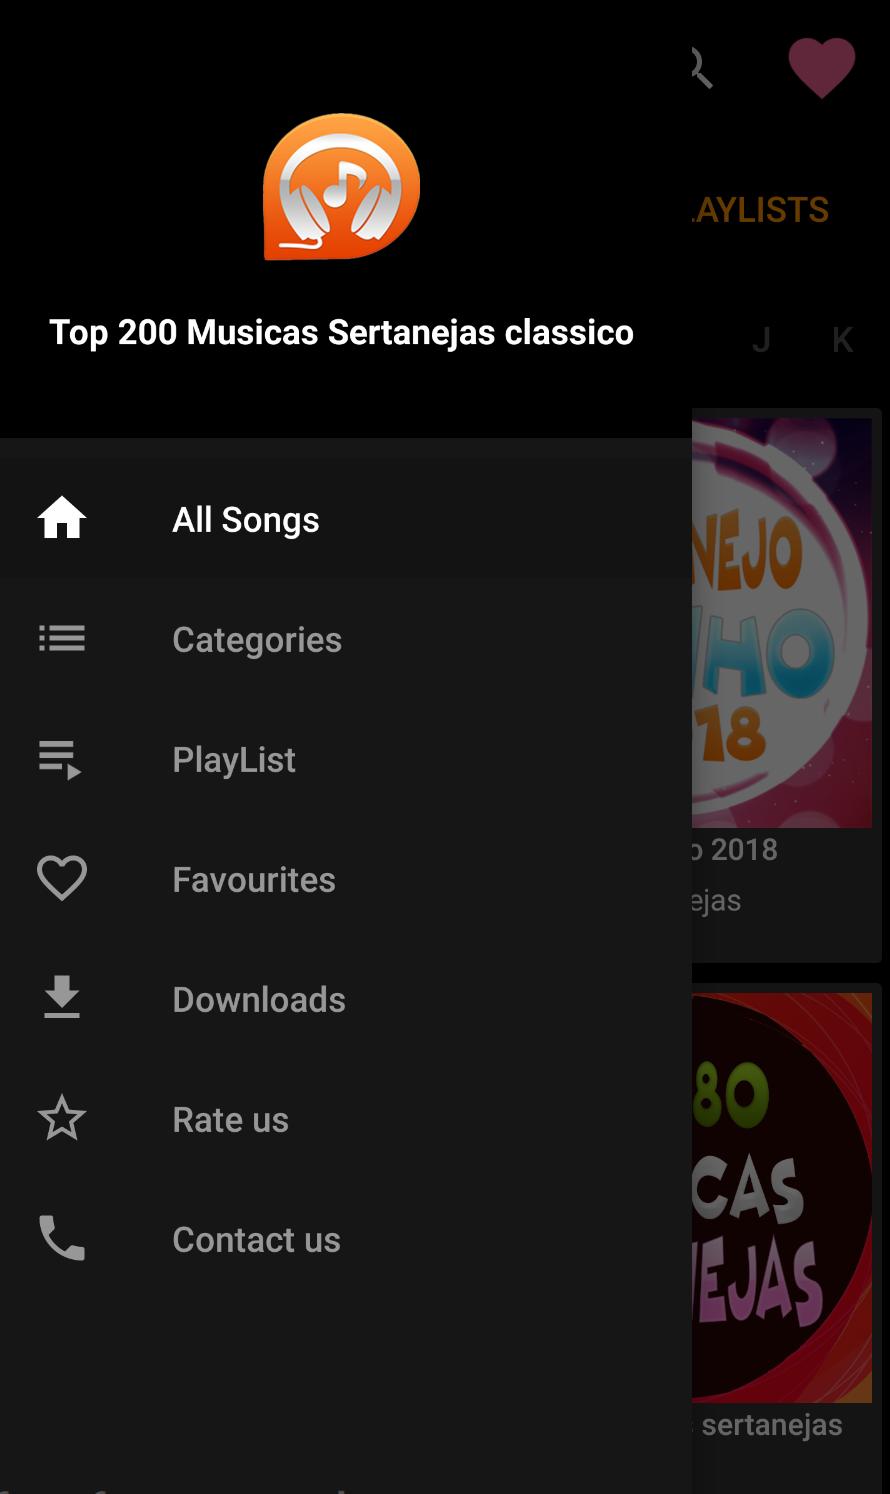 Top 200 classico sertanejas for Android - APK Download